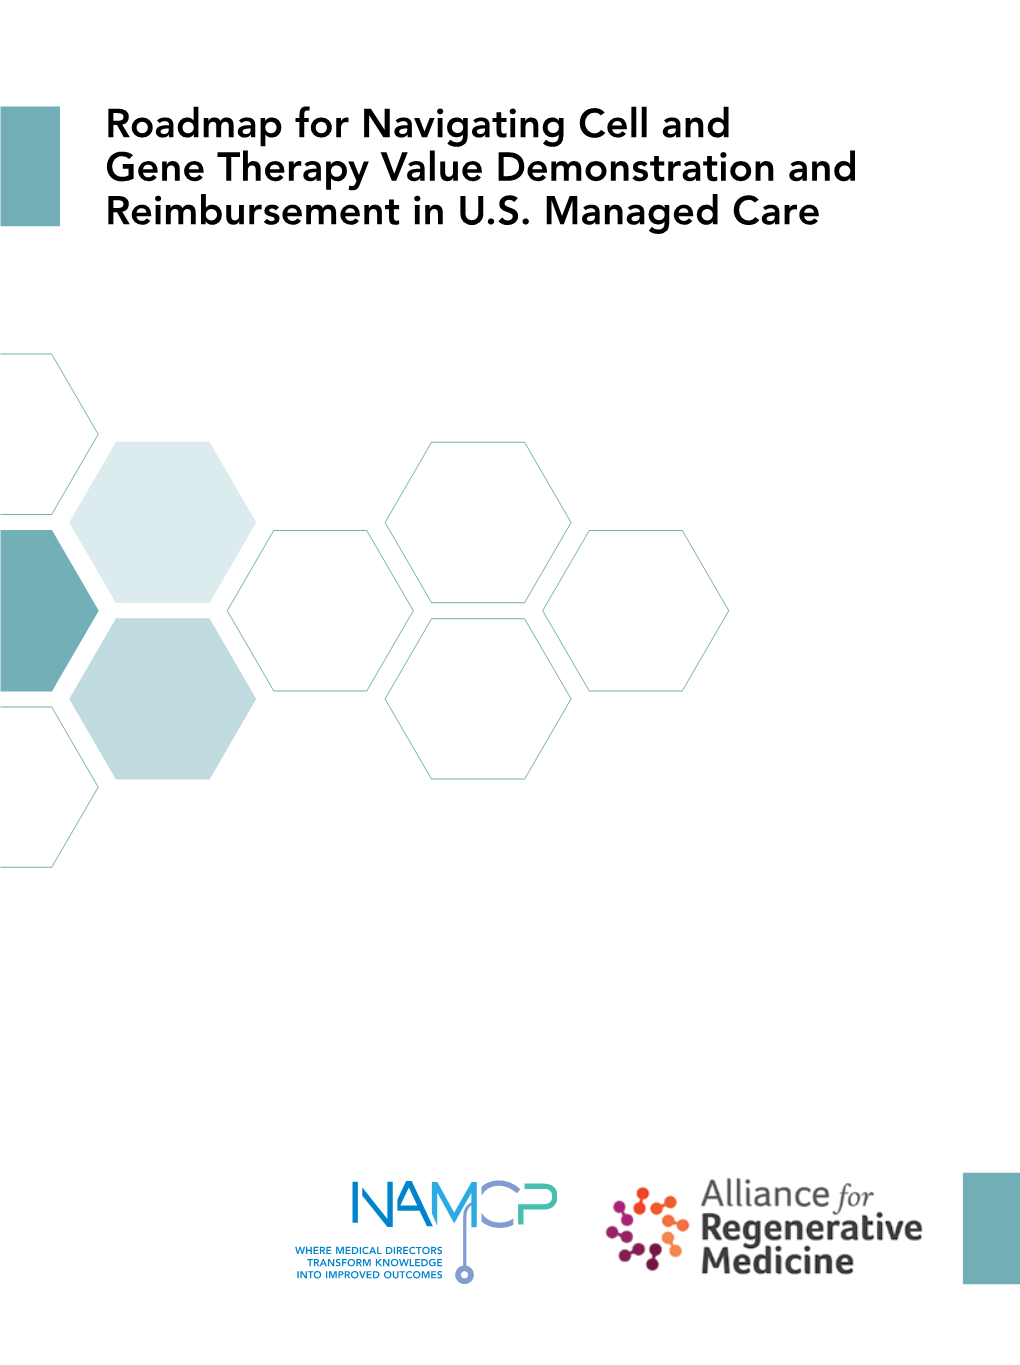 Roadmap for Navigating Cell and Gene Therapy Value Demonstration and Reimbursement in U.S